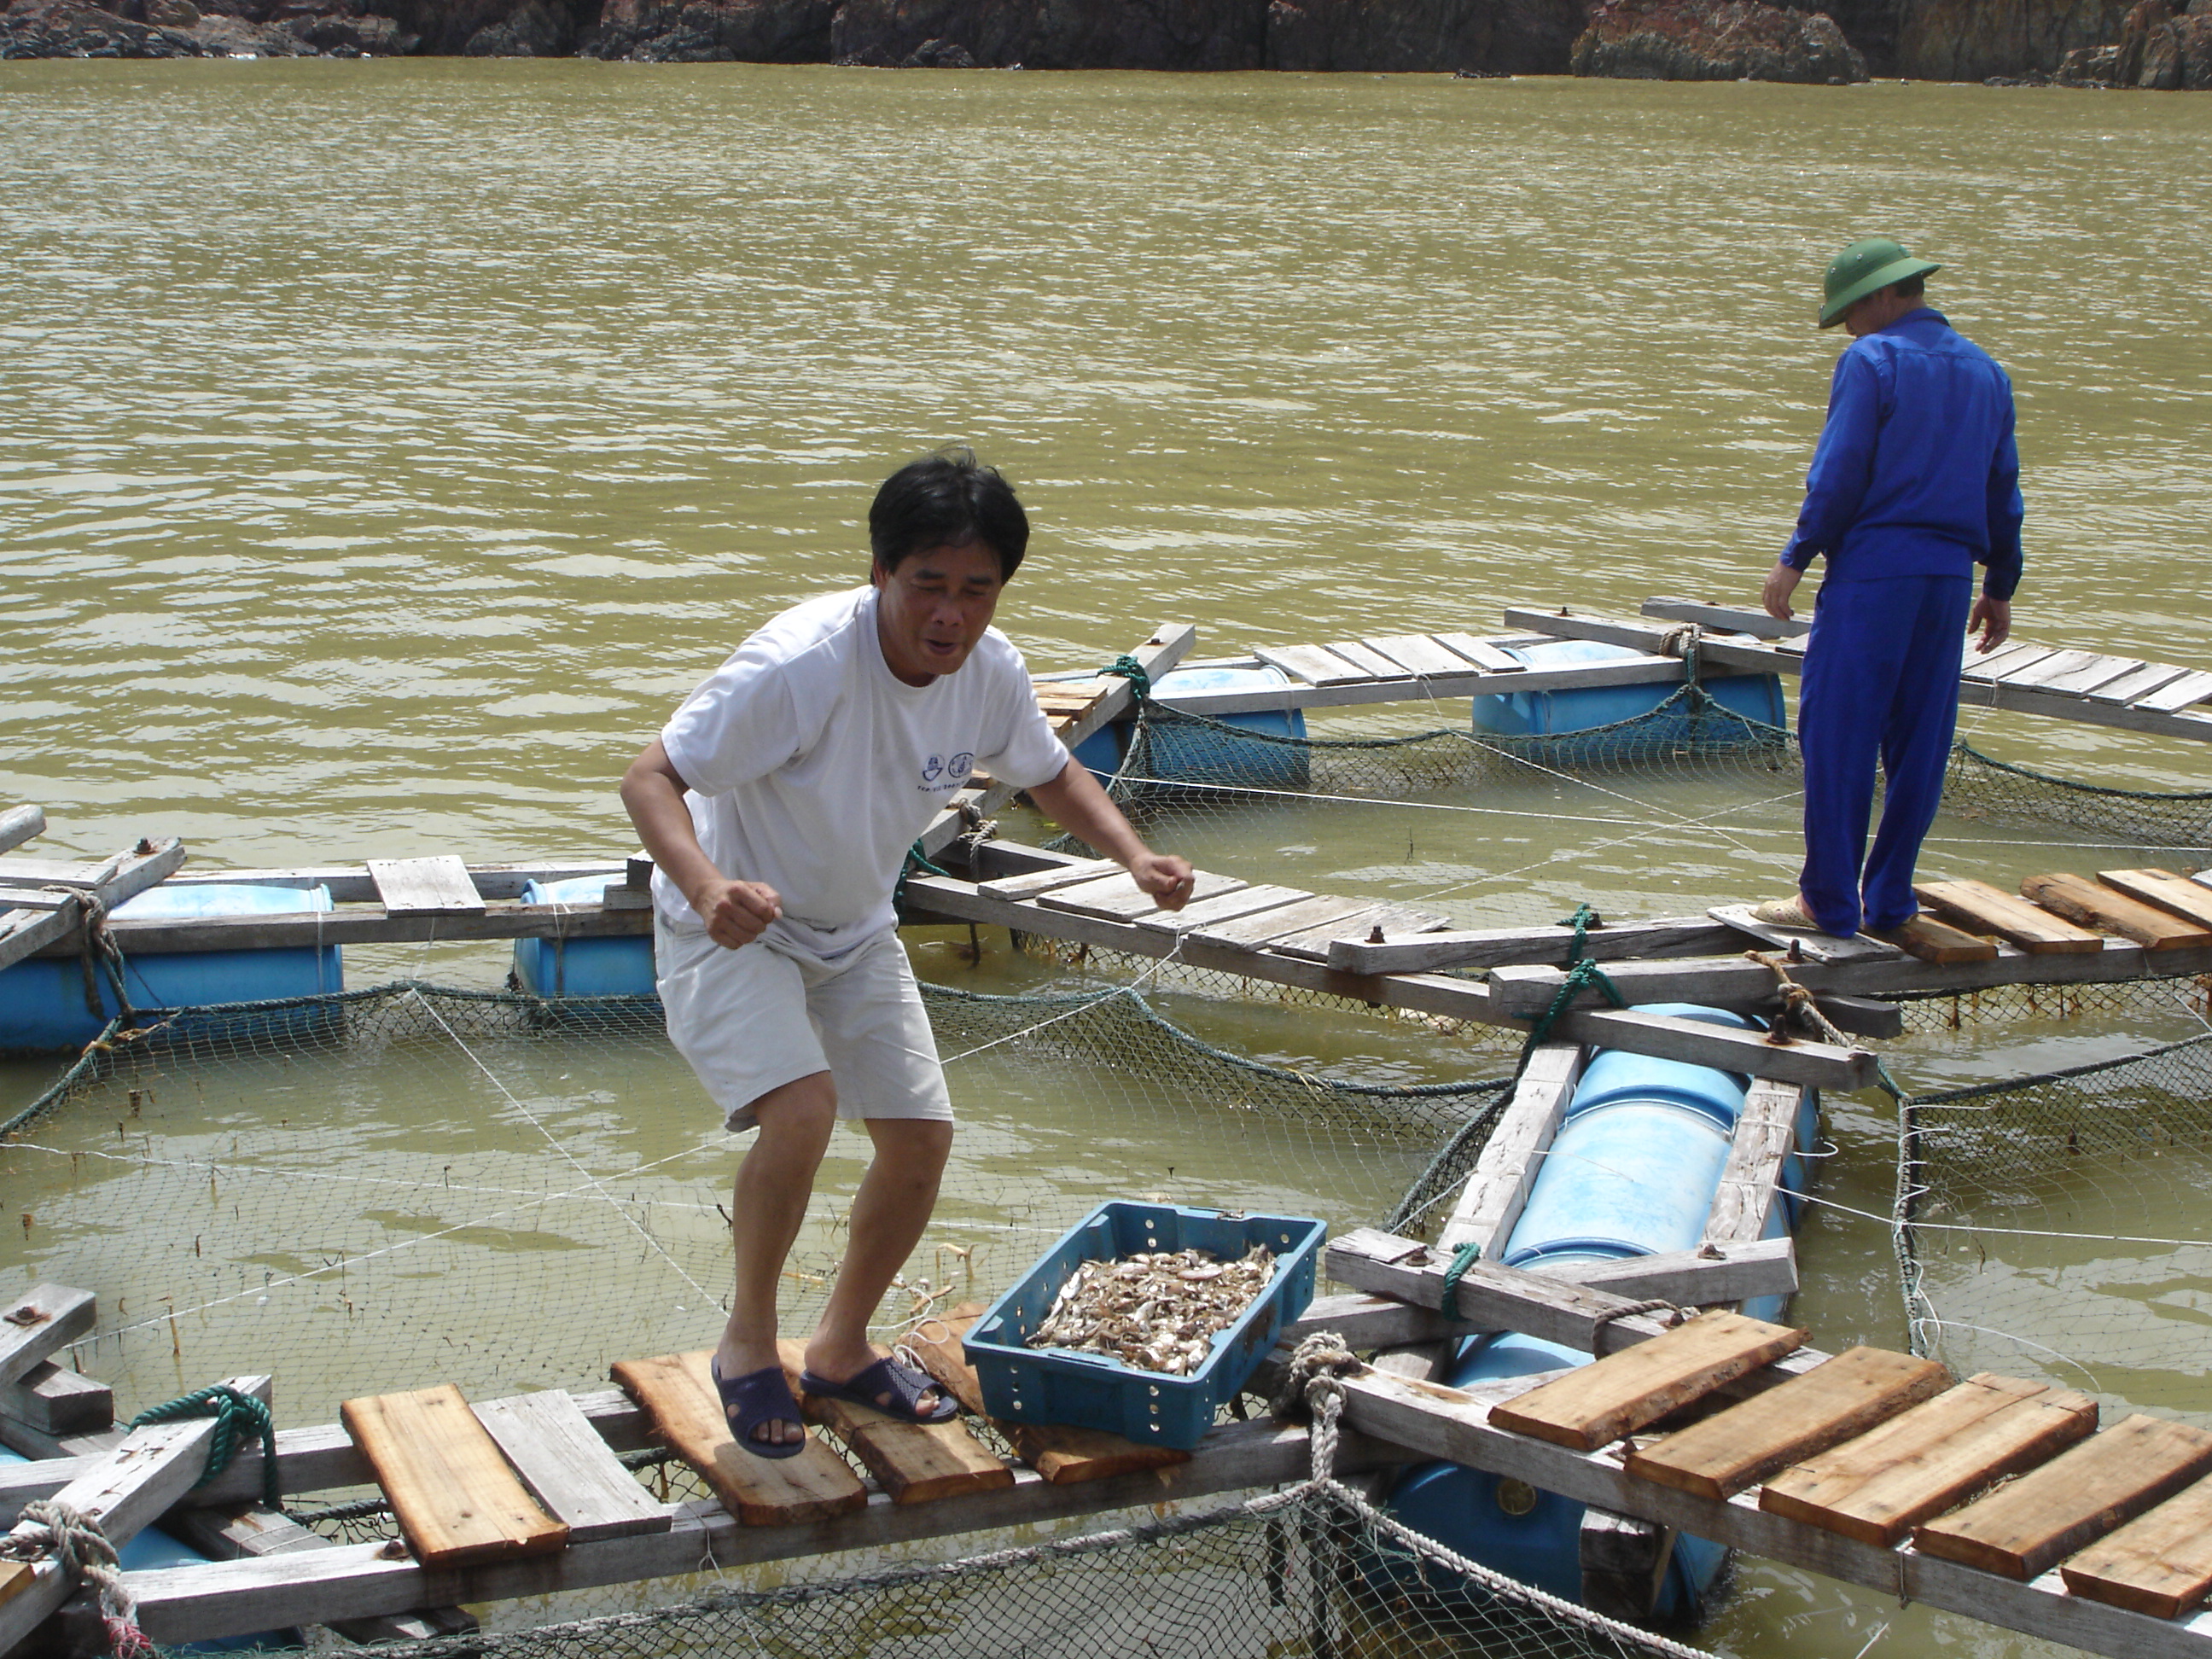 Quang Ninh province: The total production of fisheries increased by 4.8 percent